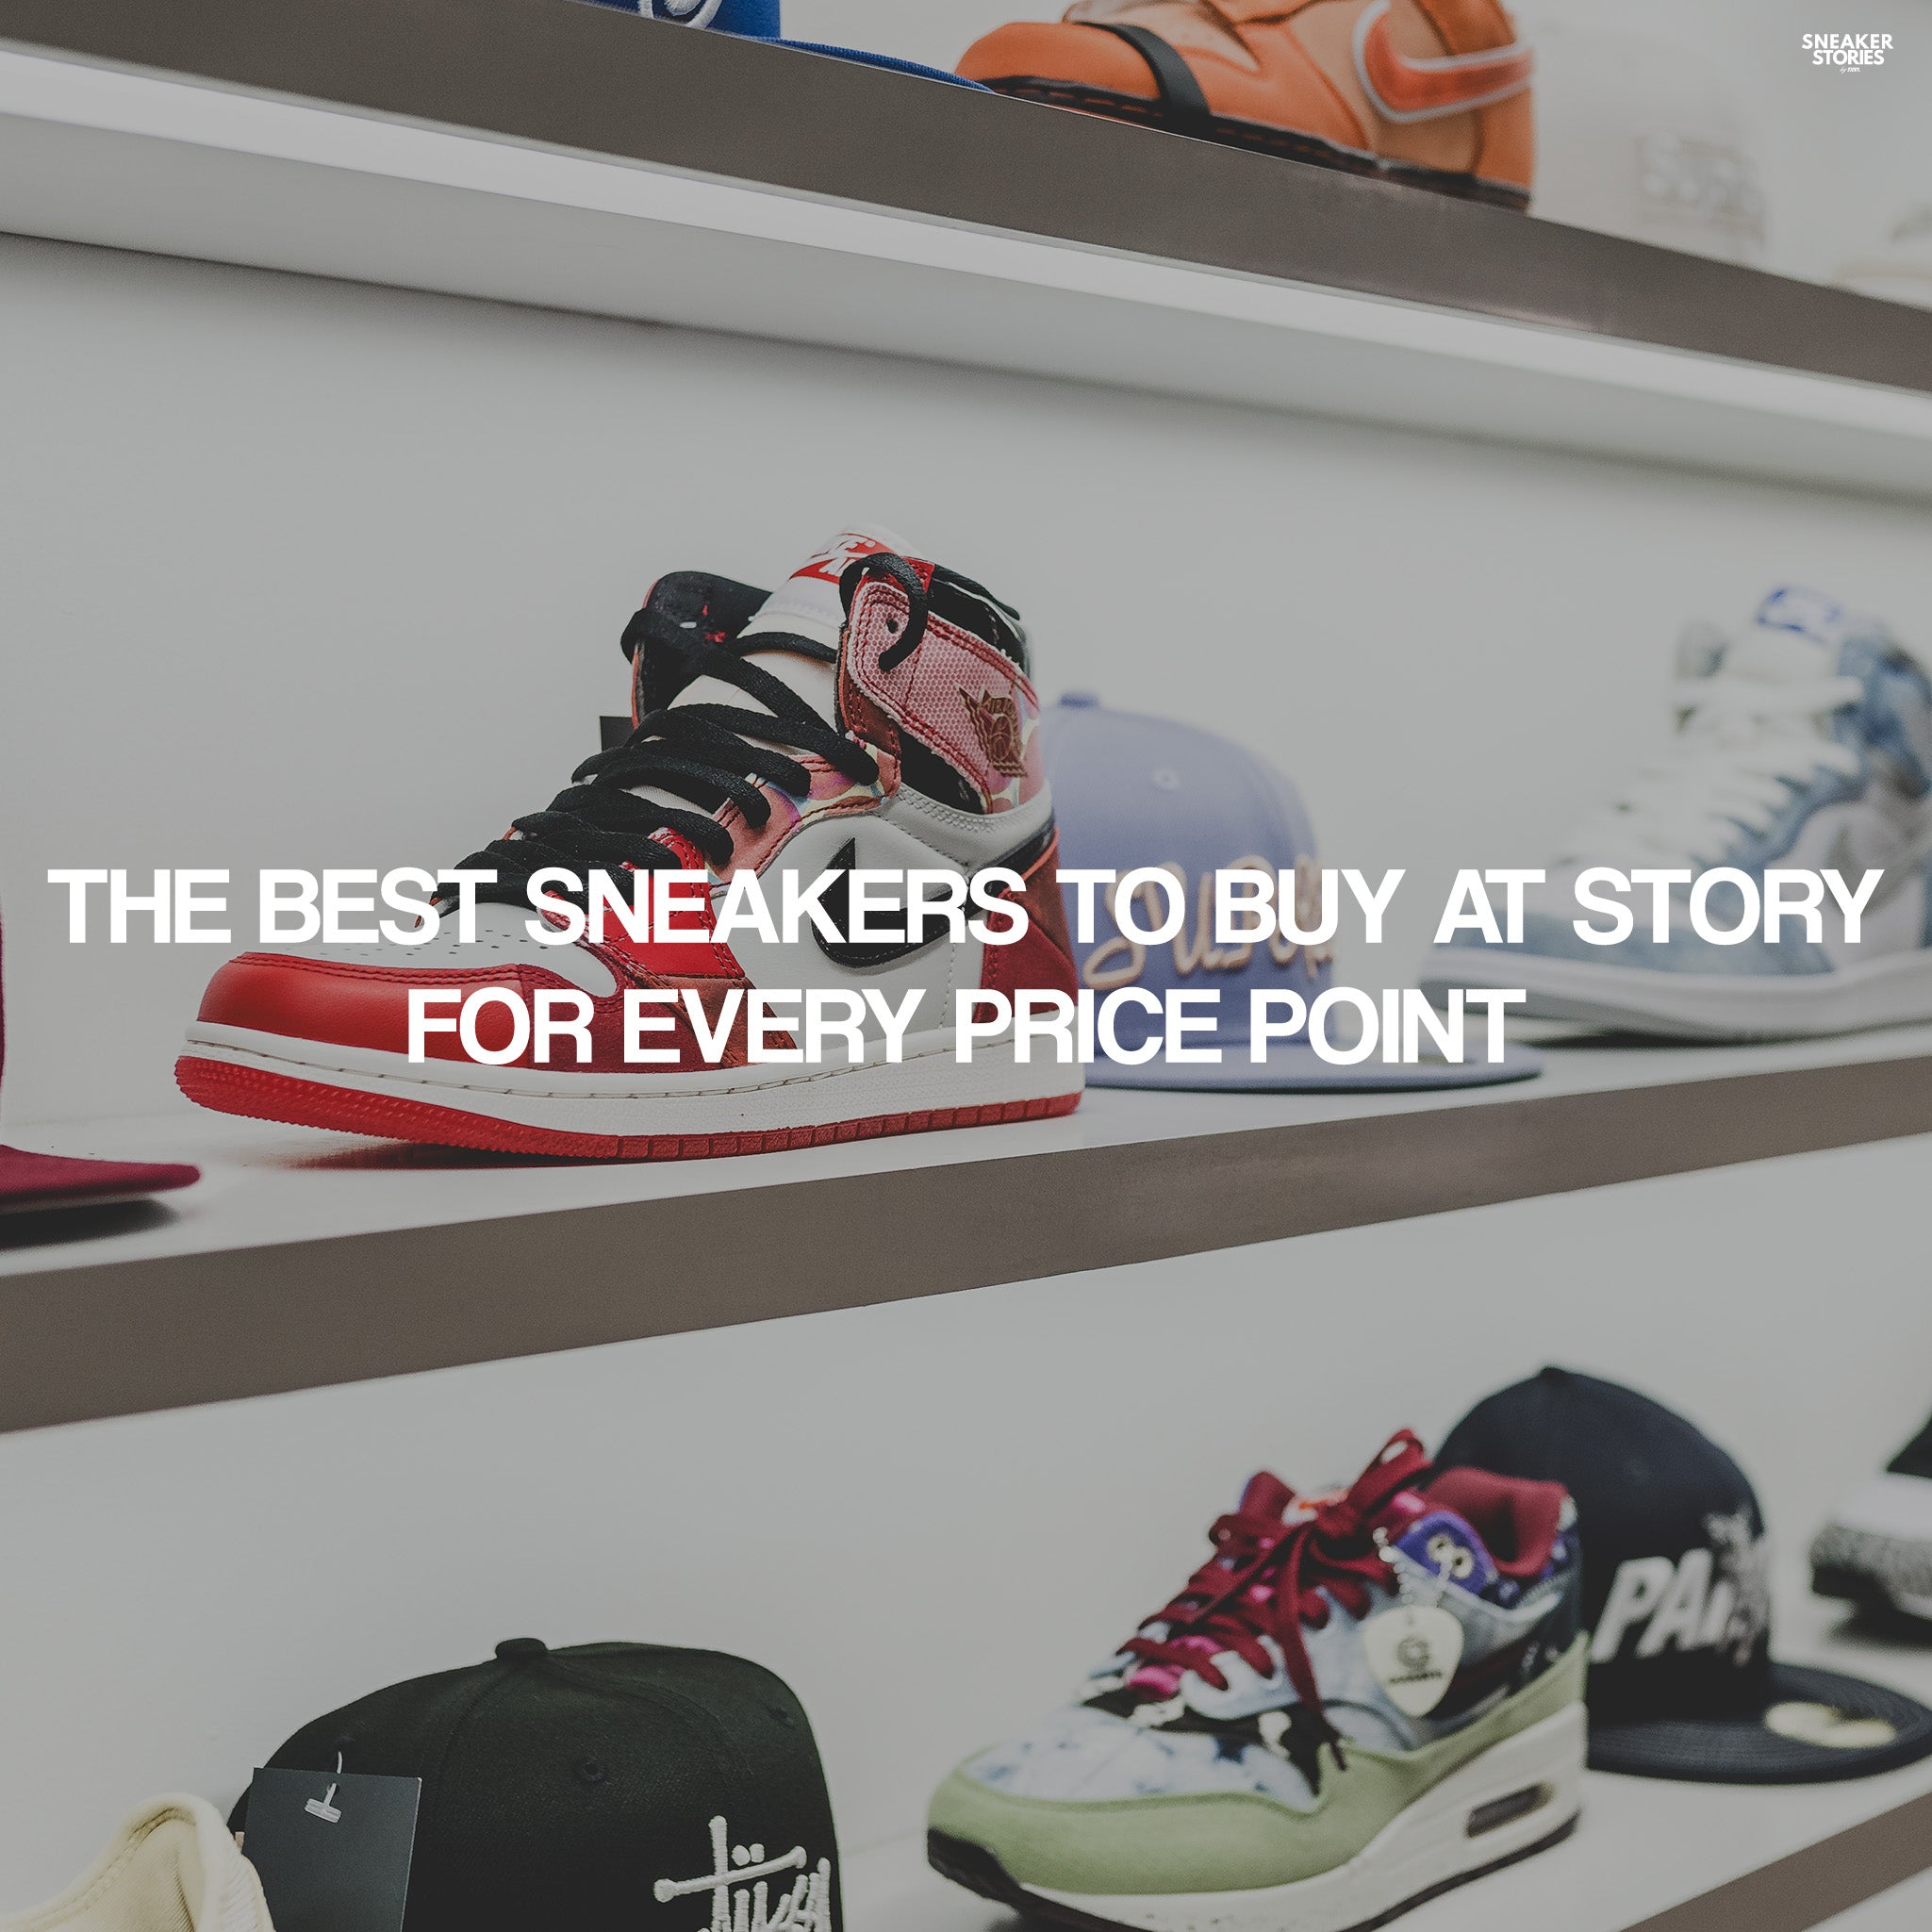 The best sneakers to buy at Story for every price point